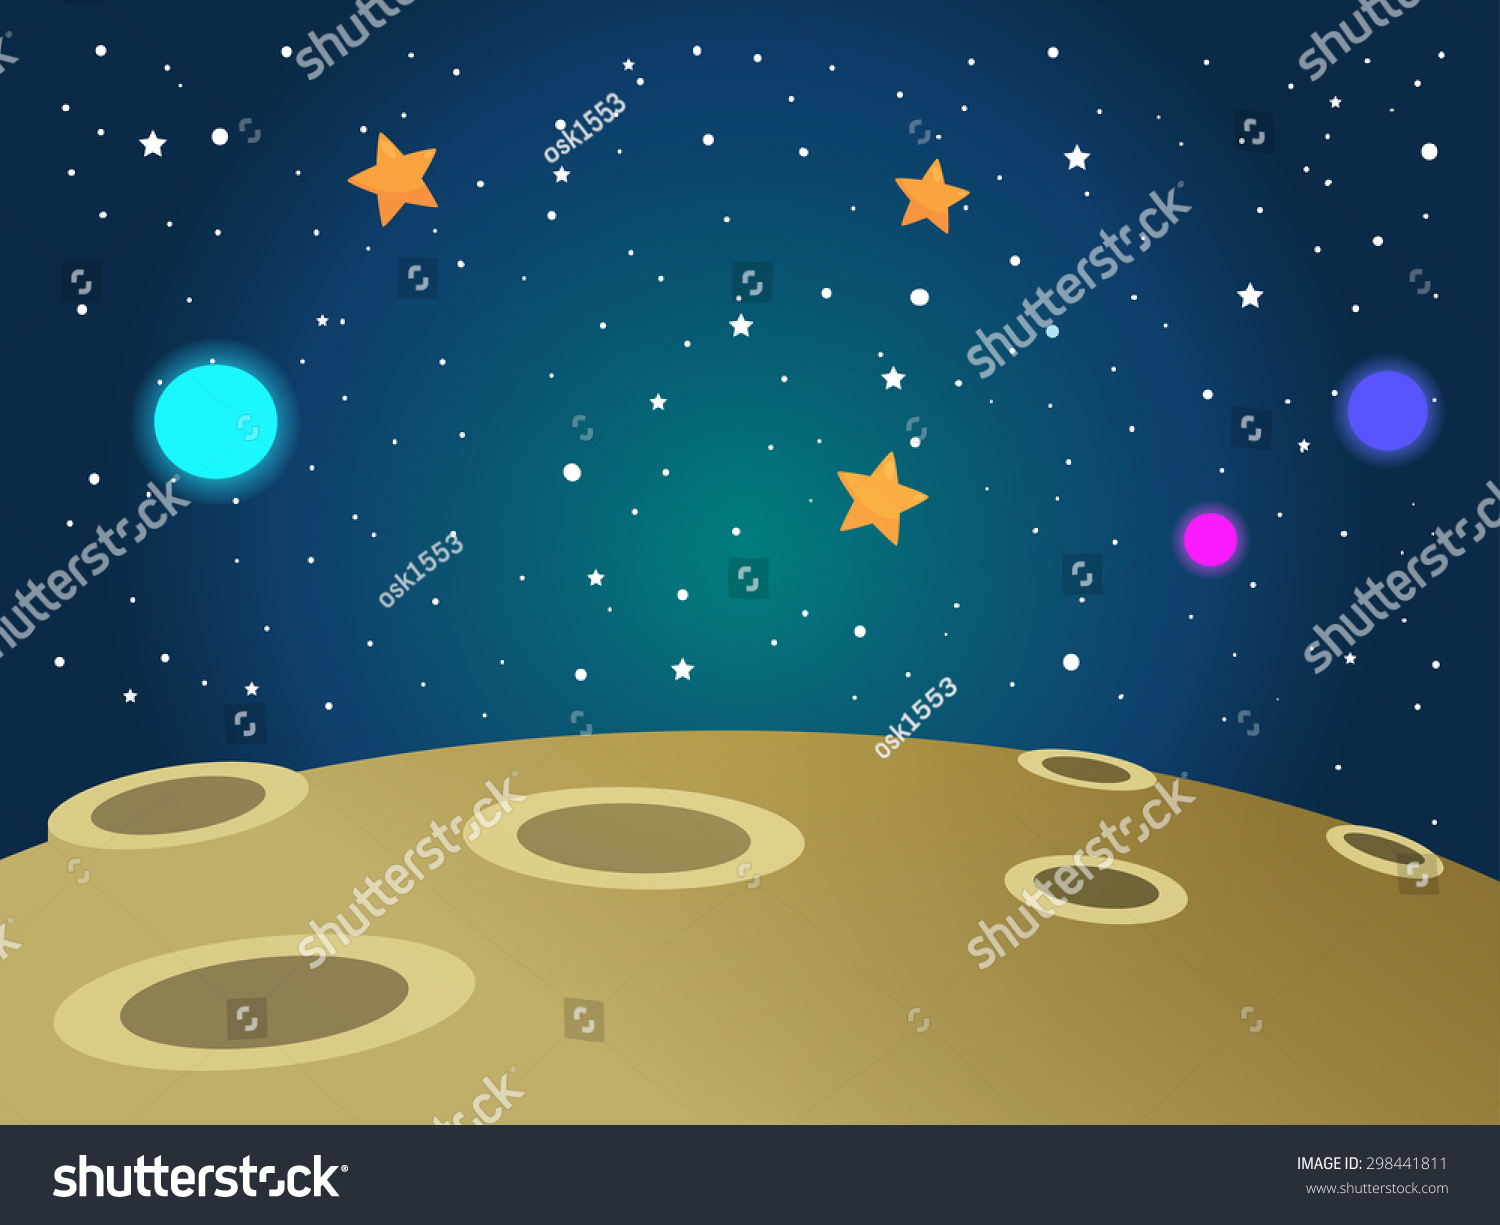 space clipart background - photo #19